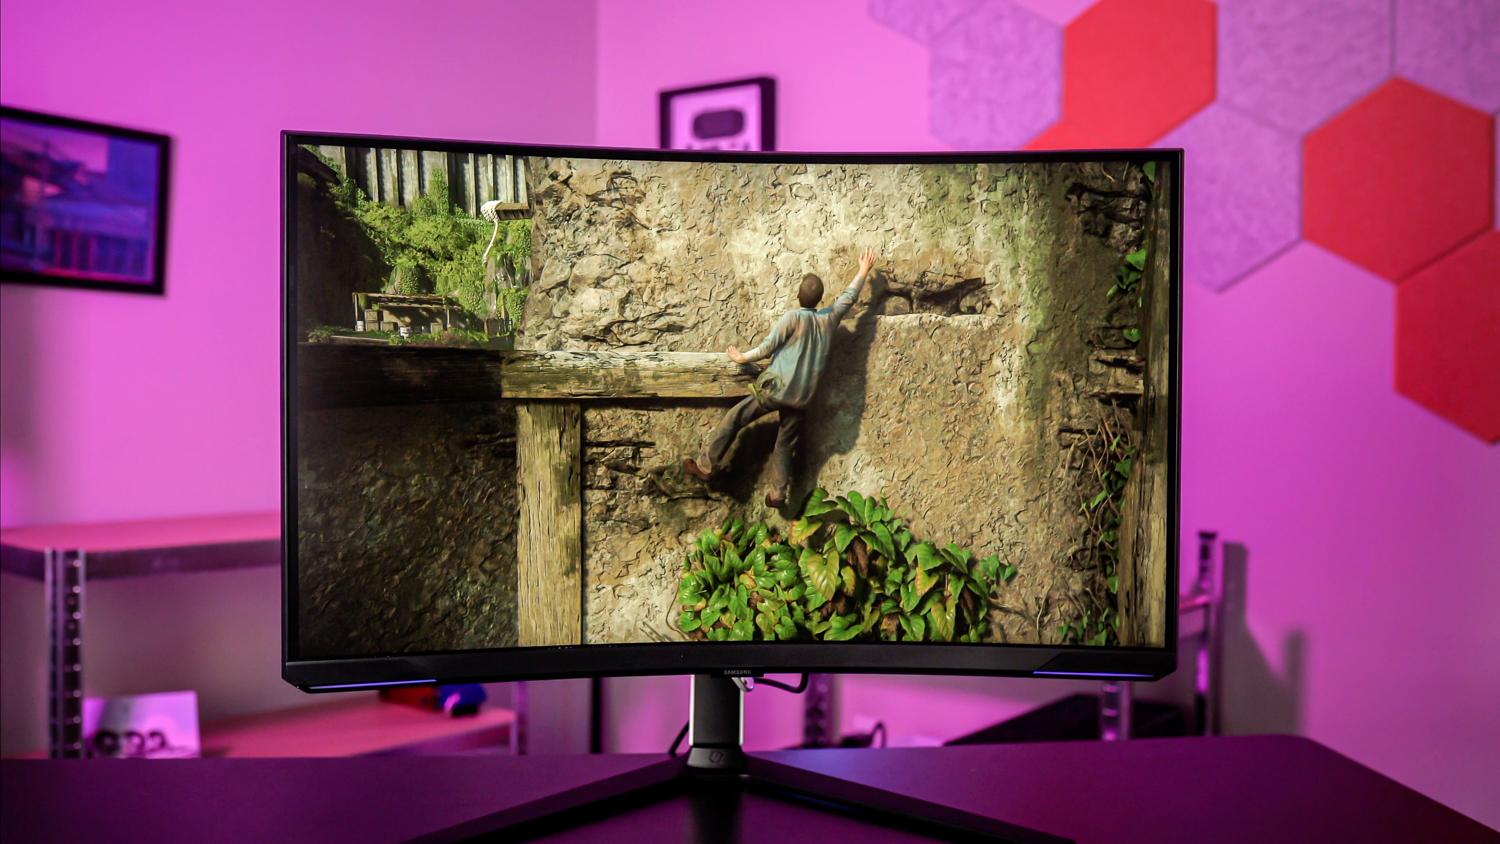 4K gaming monitors are getting cheaper, but I won't buy one